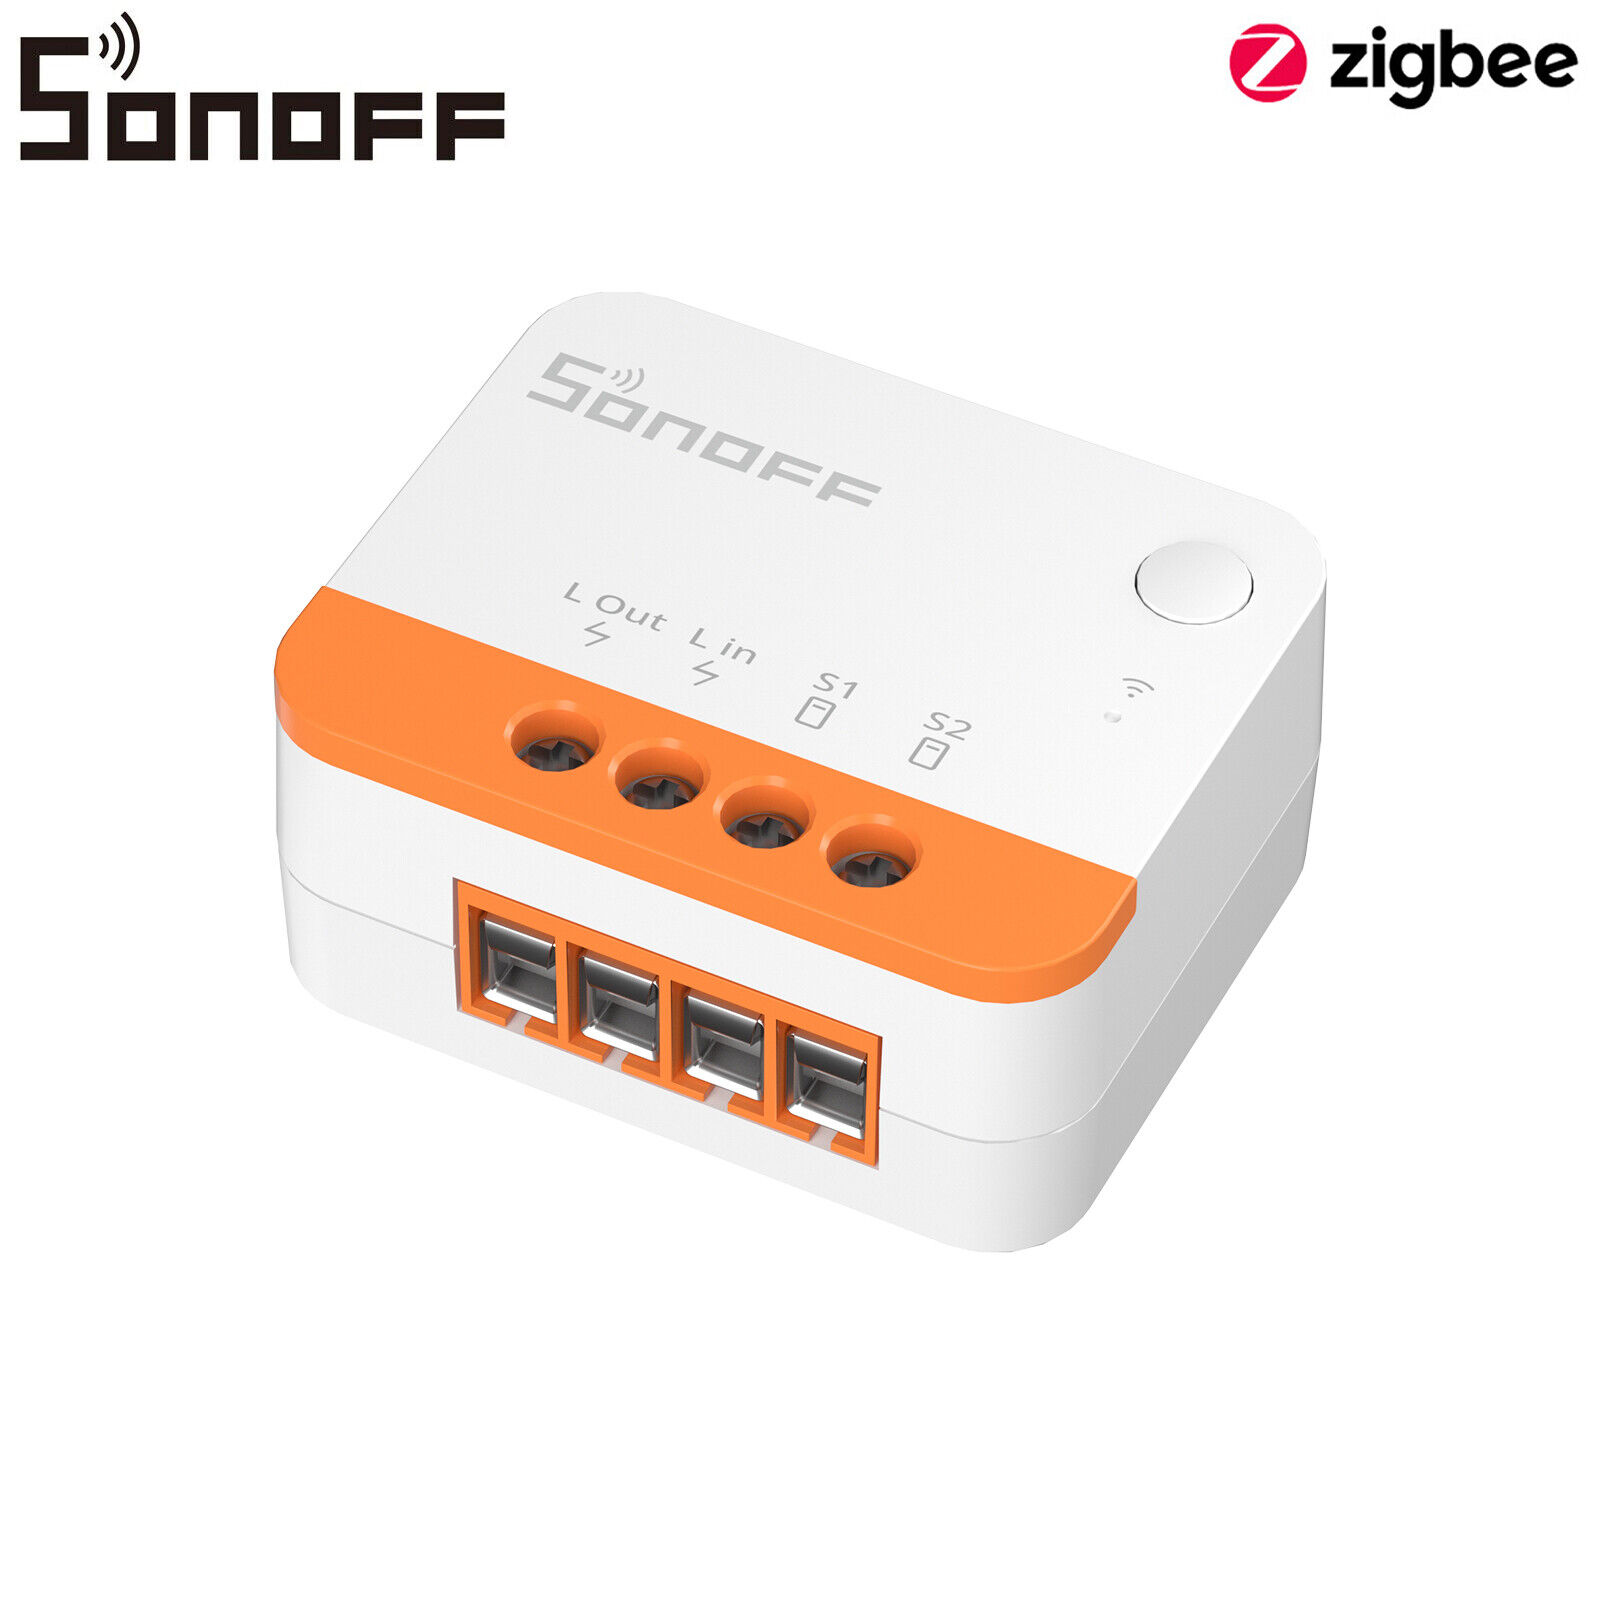 SONOFF ZBMINI-L2 Zigbee 3.0 Smart Switch Two Way Relay No Neutral Wire Required